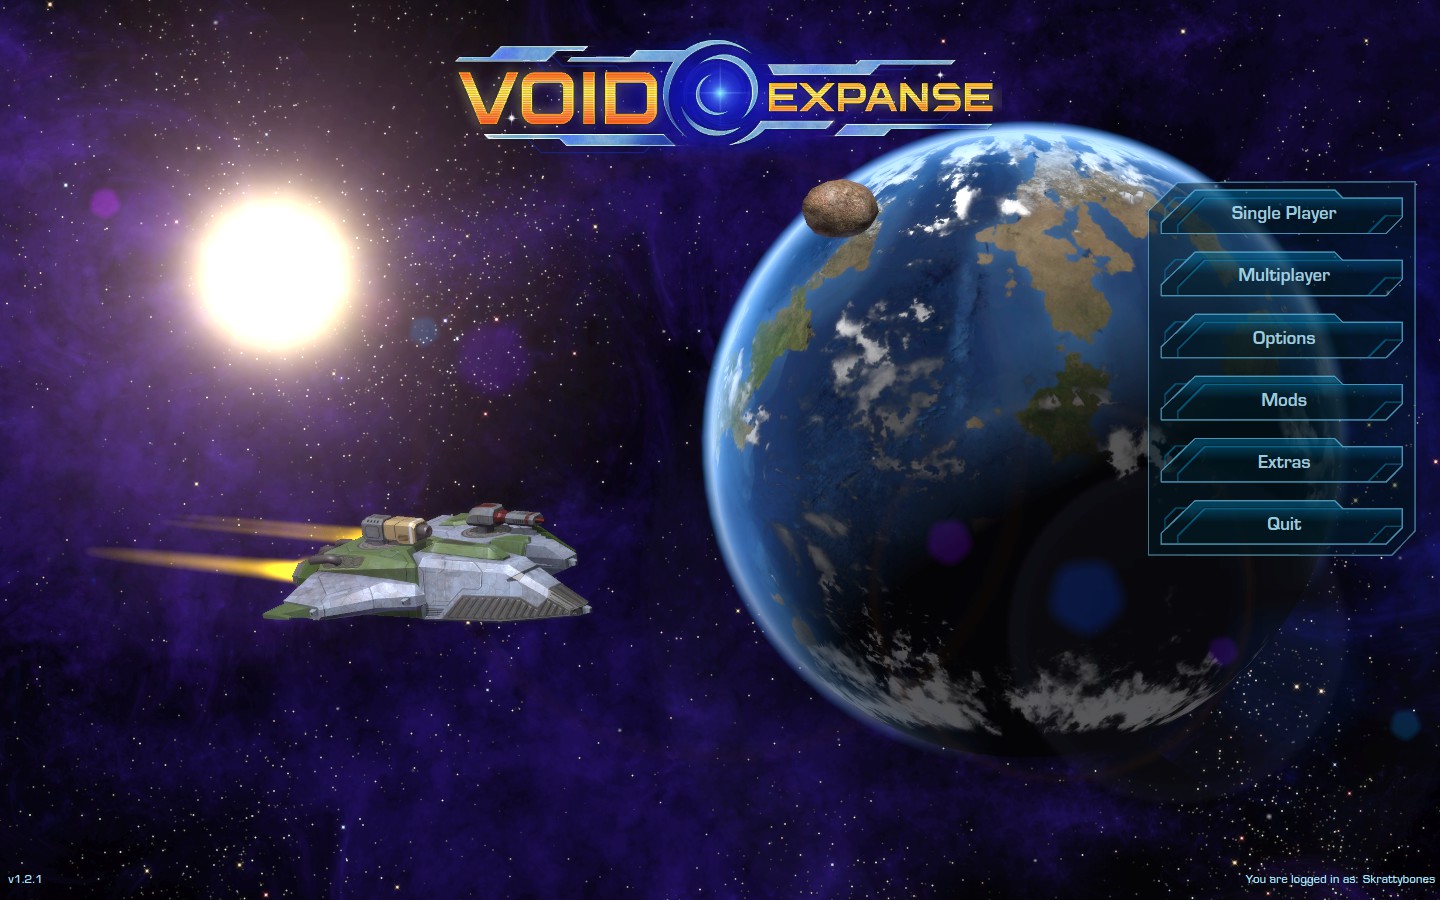 VoidExpanse review: Memories of Being a Freelancer